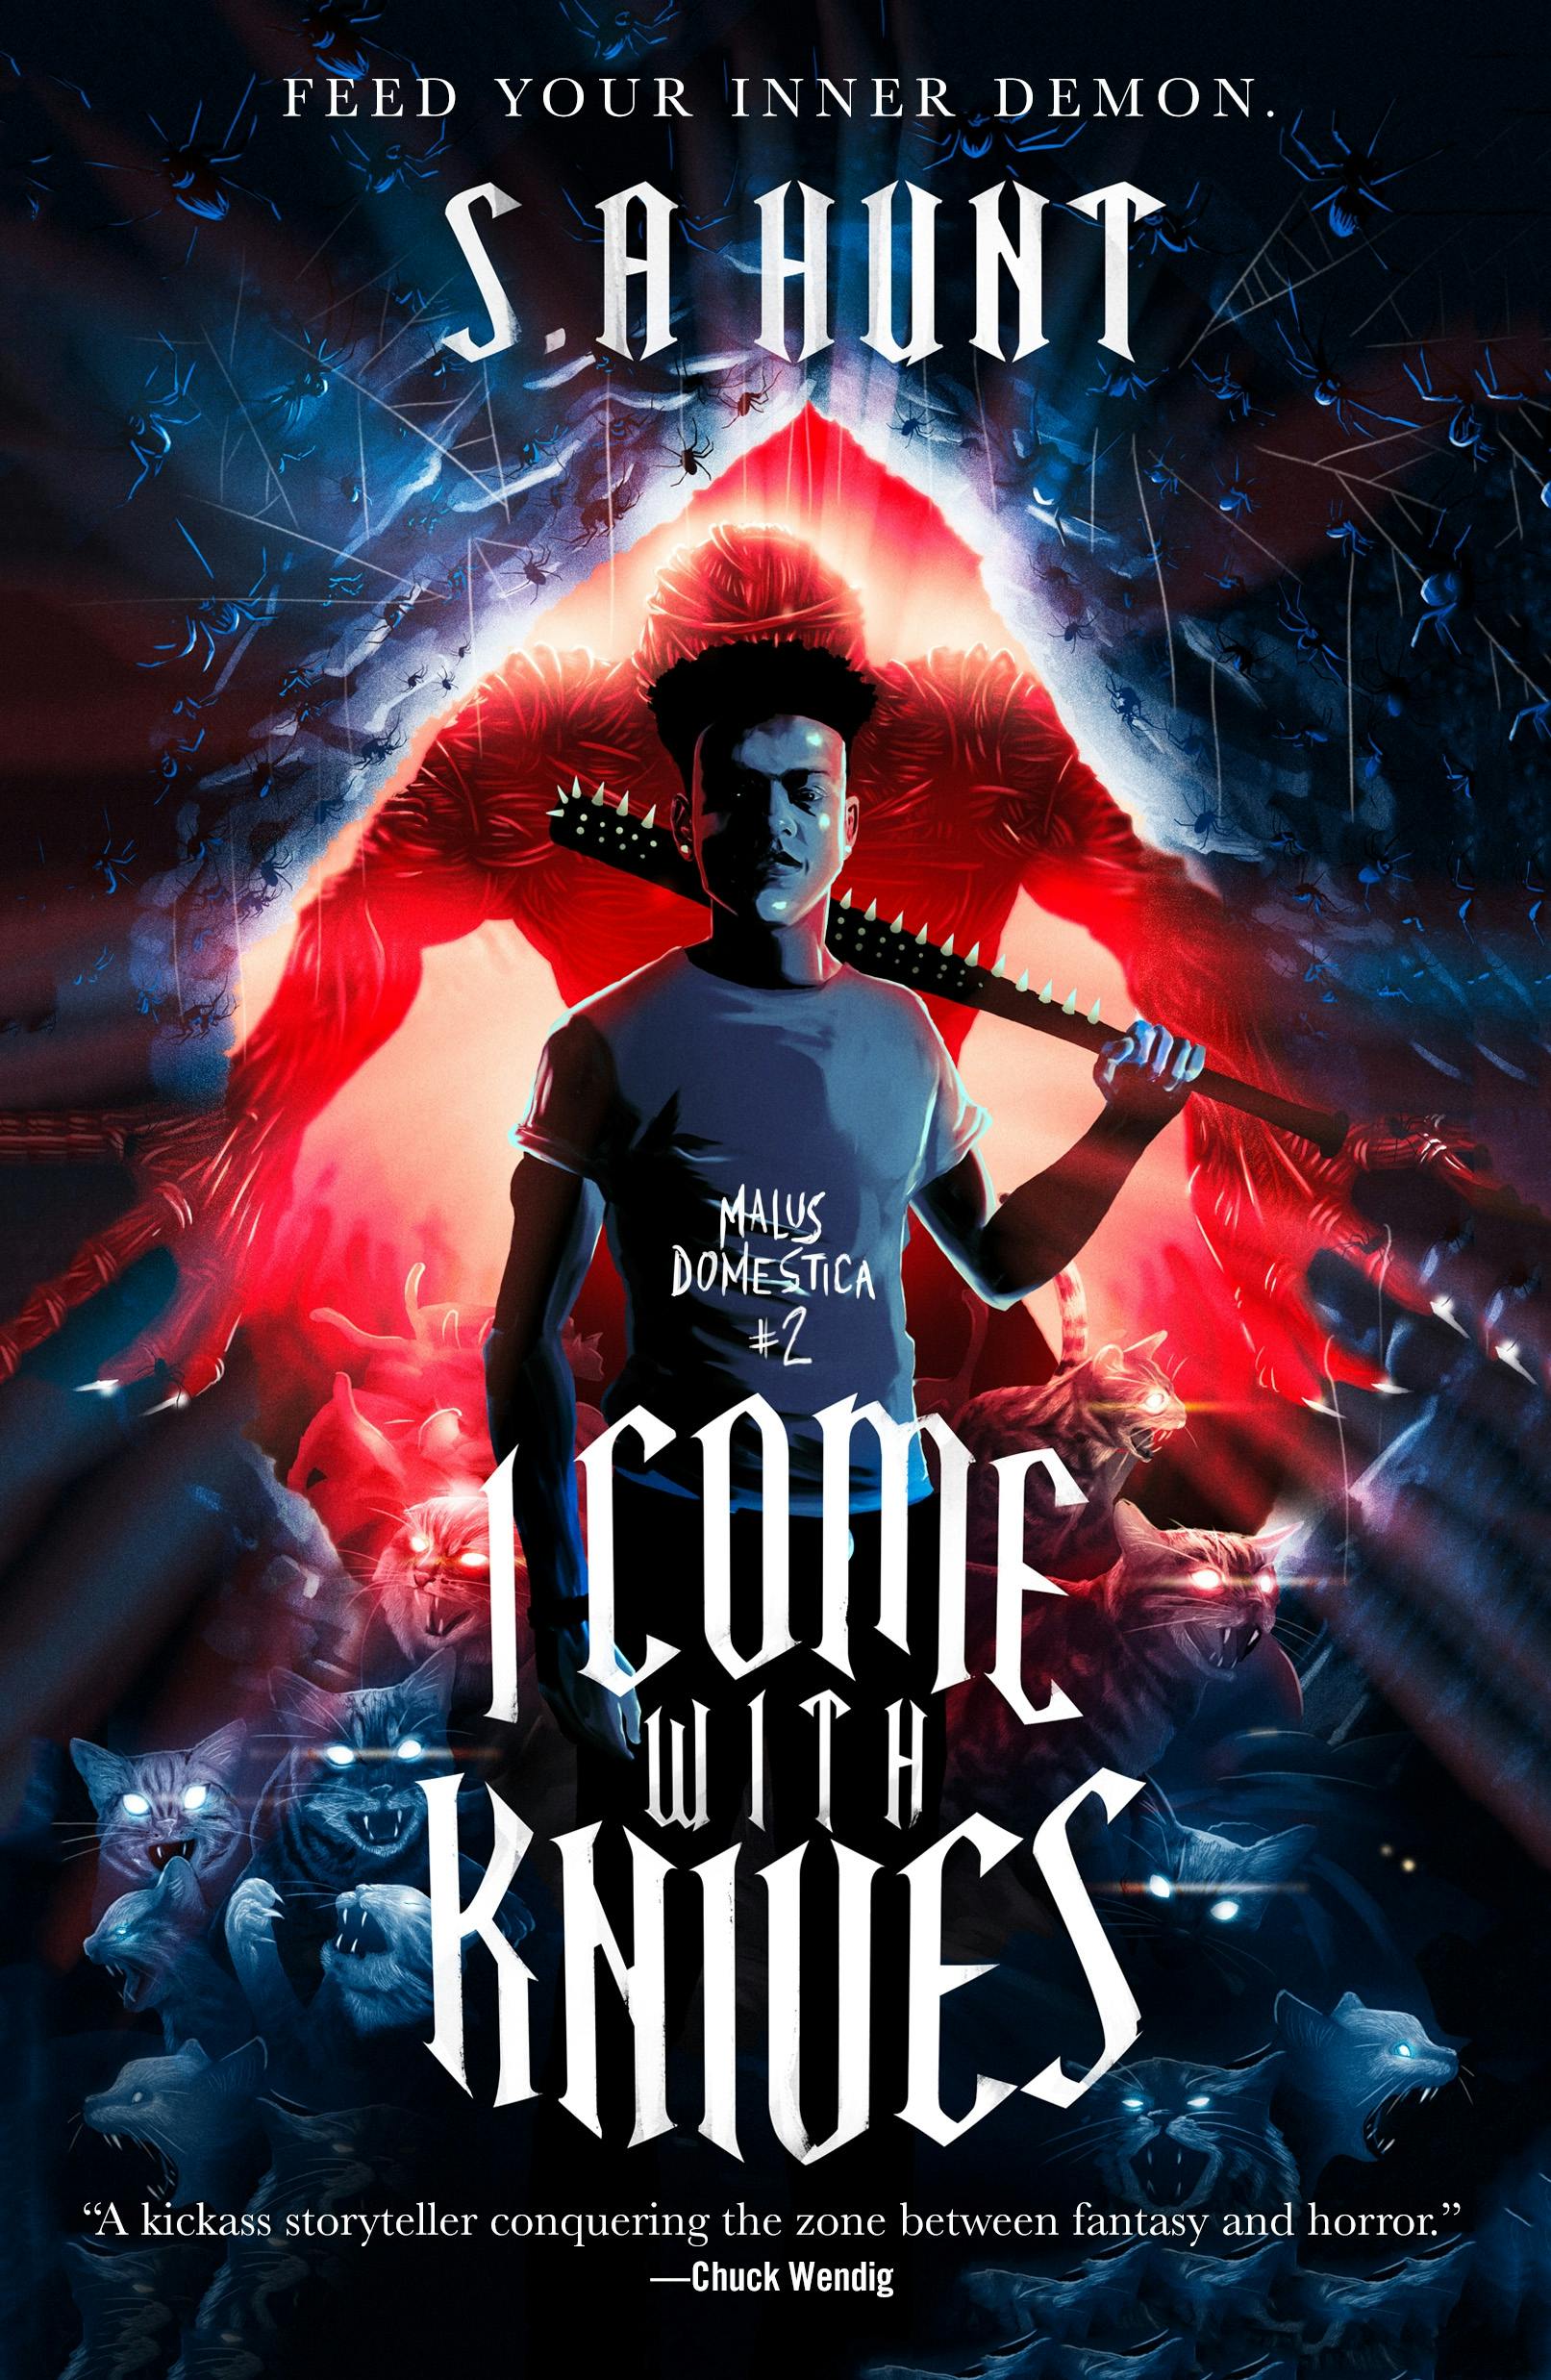 Cover for the book titled as: I Come with Knives